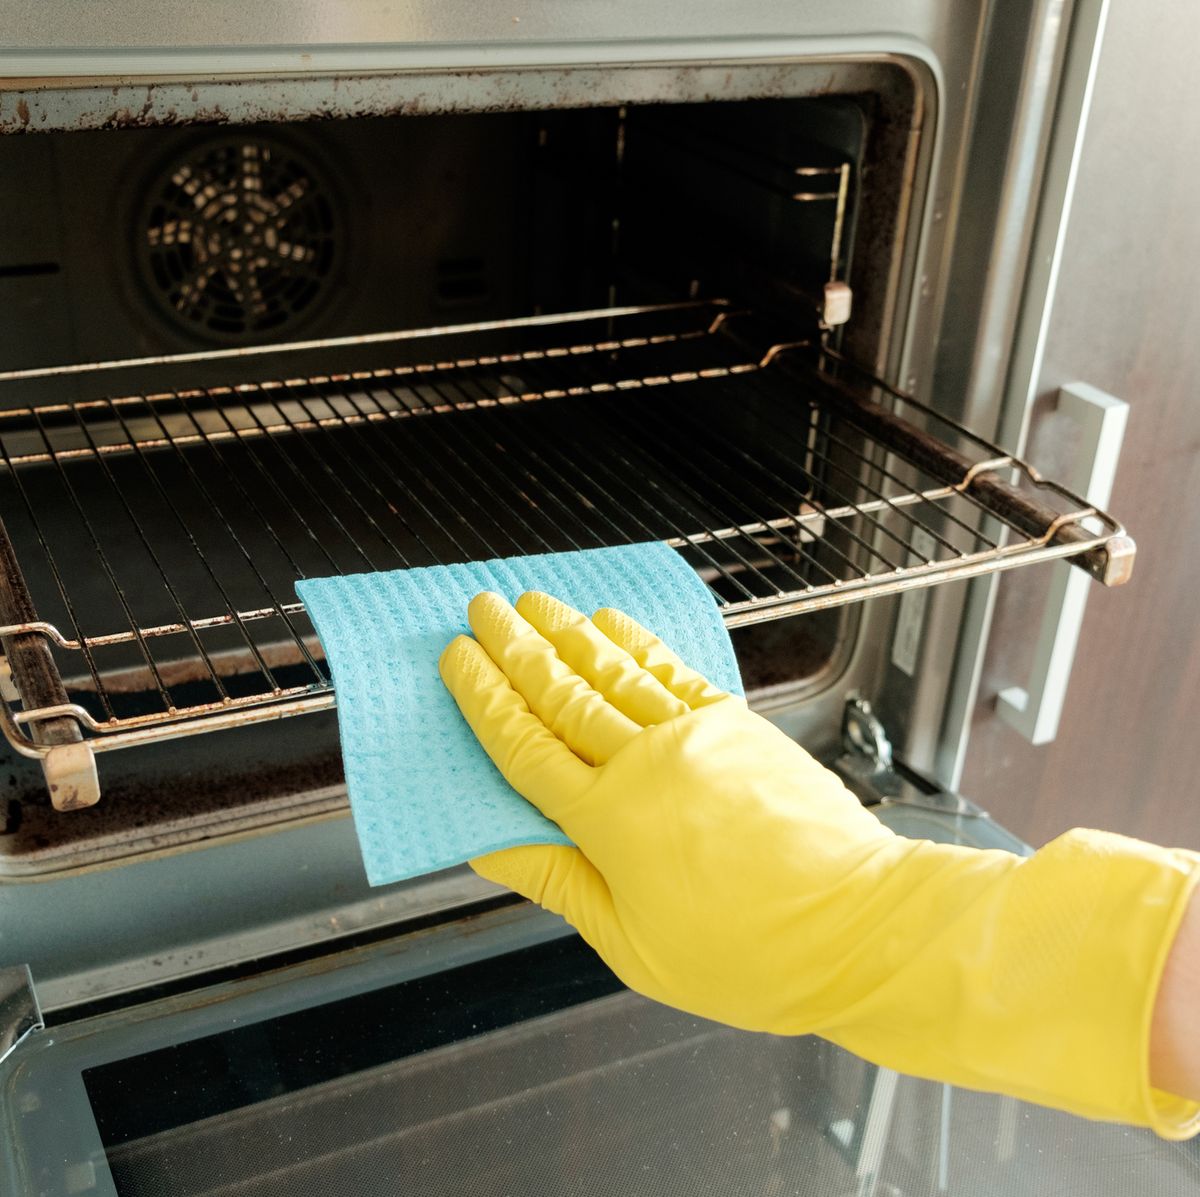 Oven cleaning: Use the 'old hanger' method to 'easily' clean